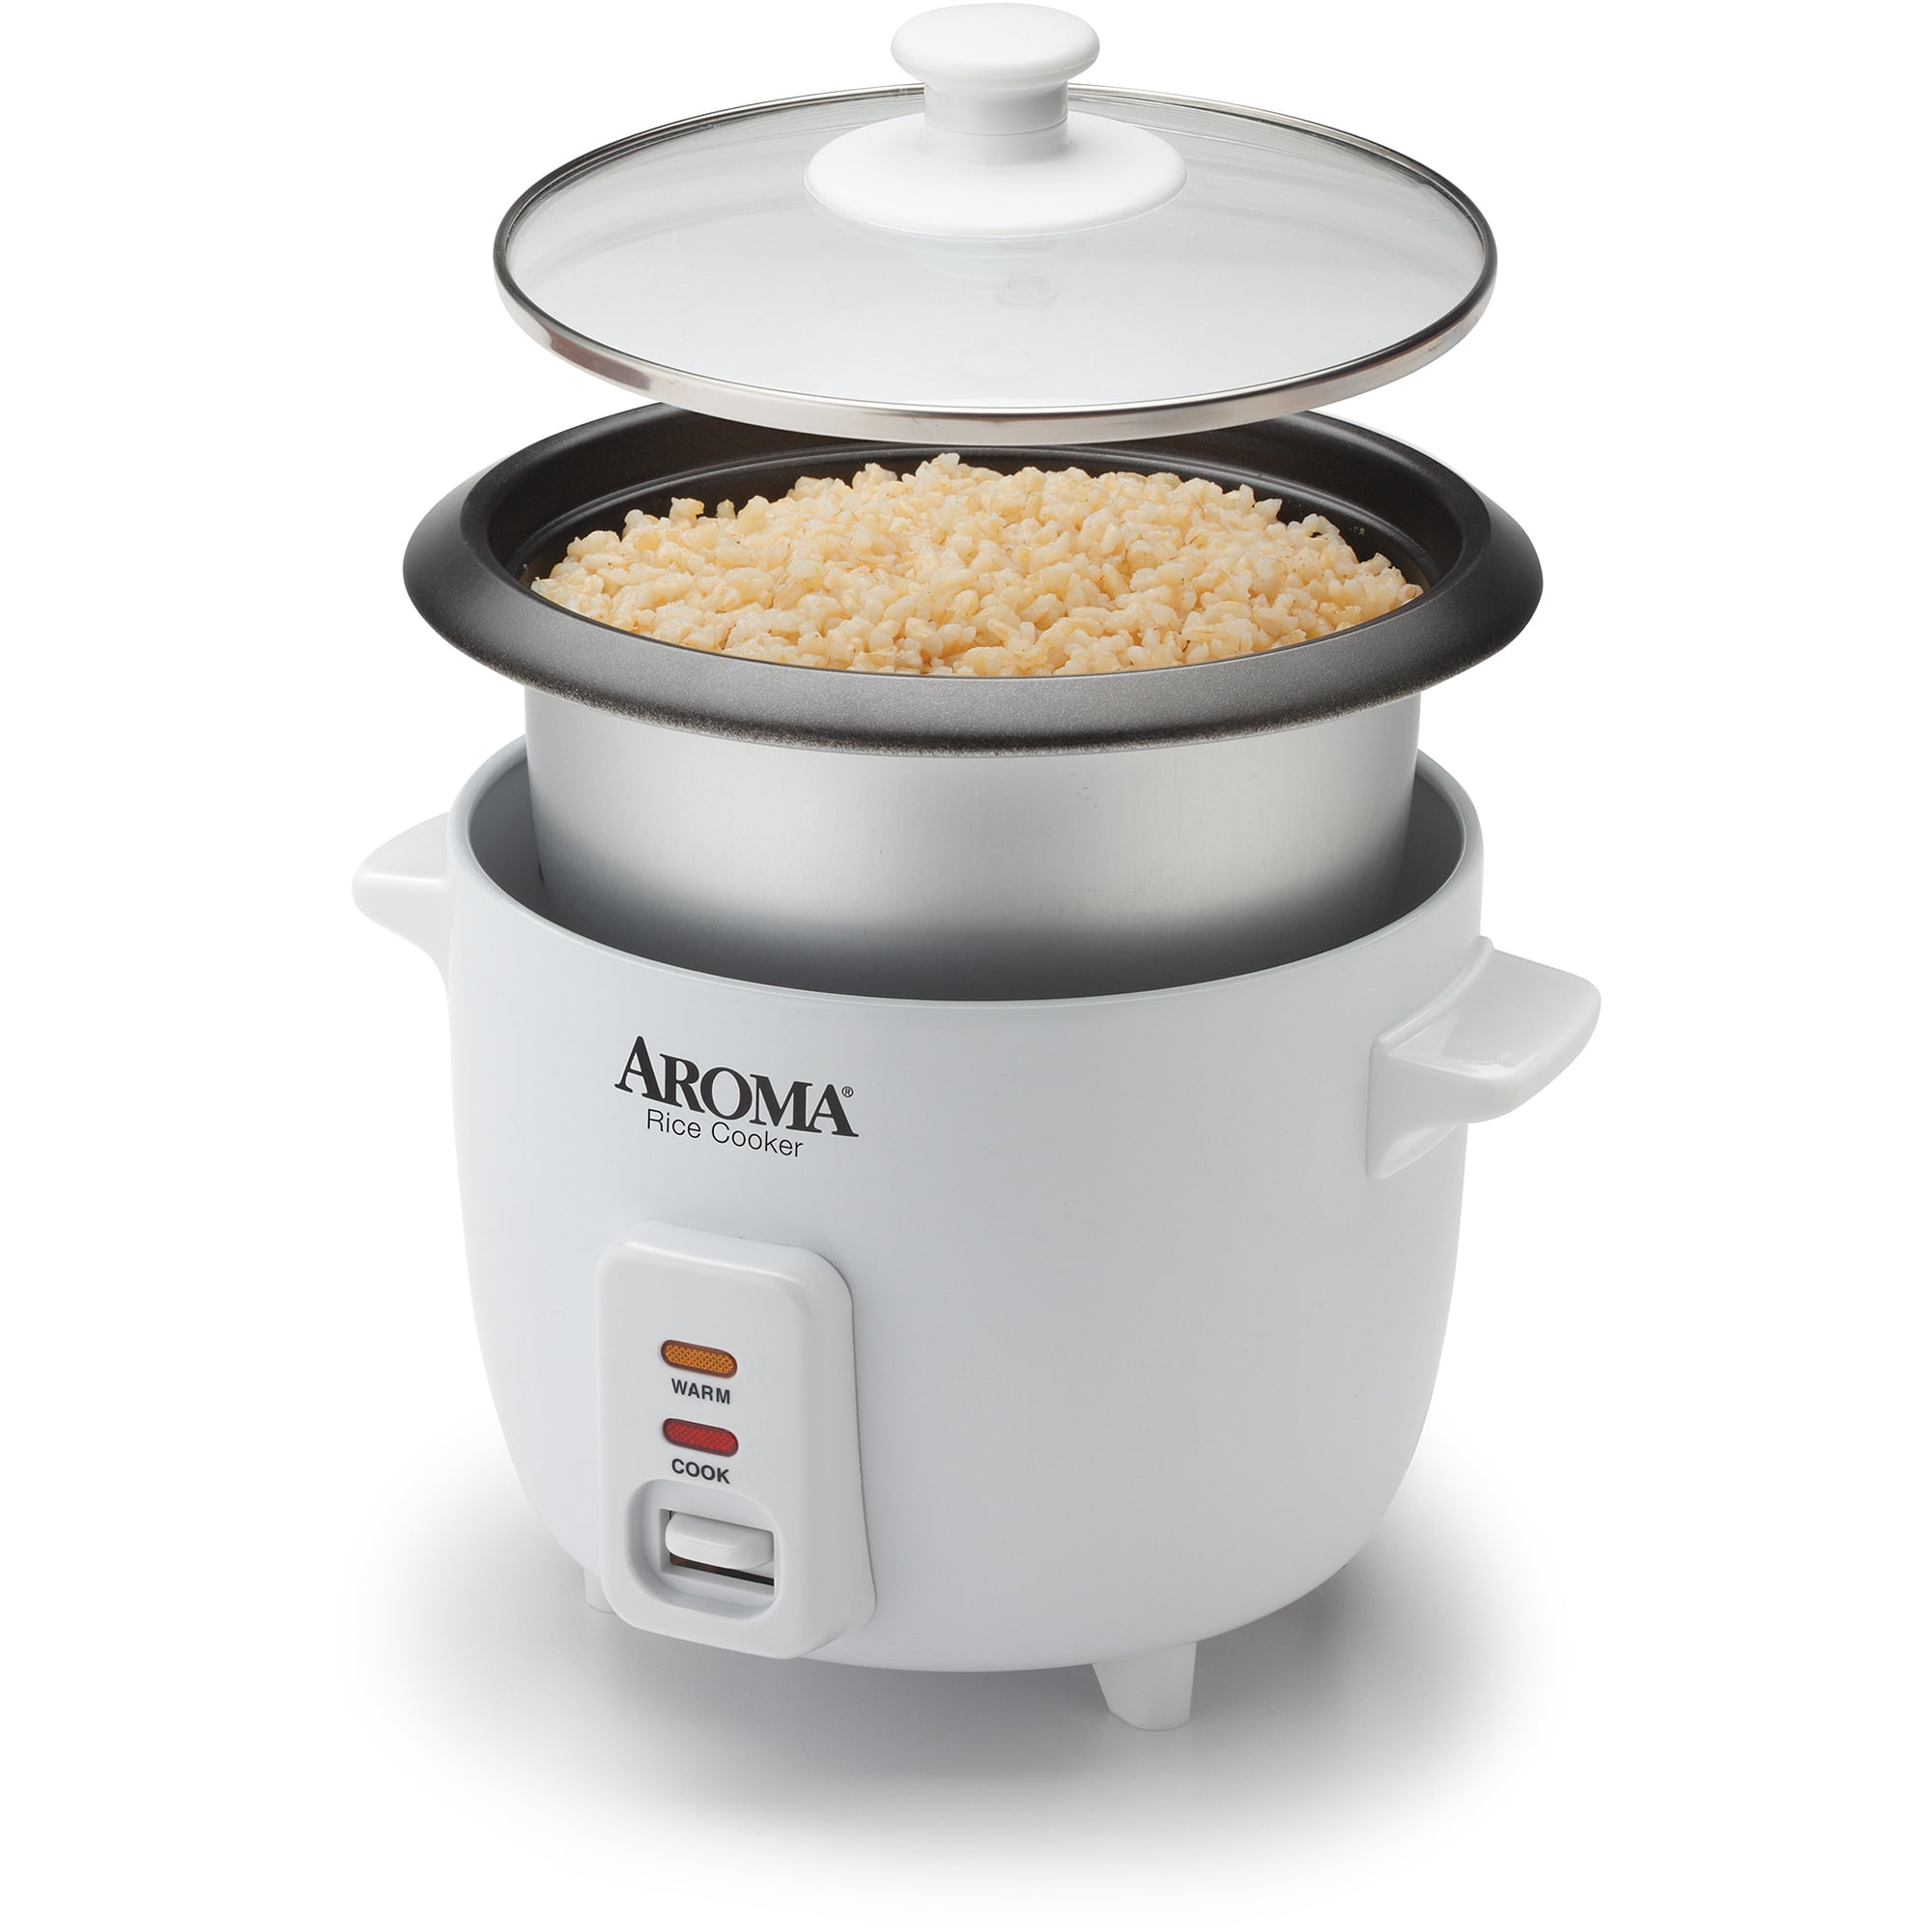 Aroma 6 Cup Non-Stick Pot Style White Rice Cooker, 3 Piece ...